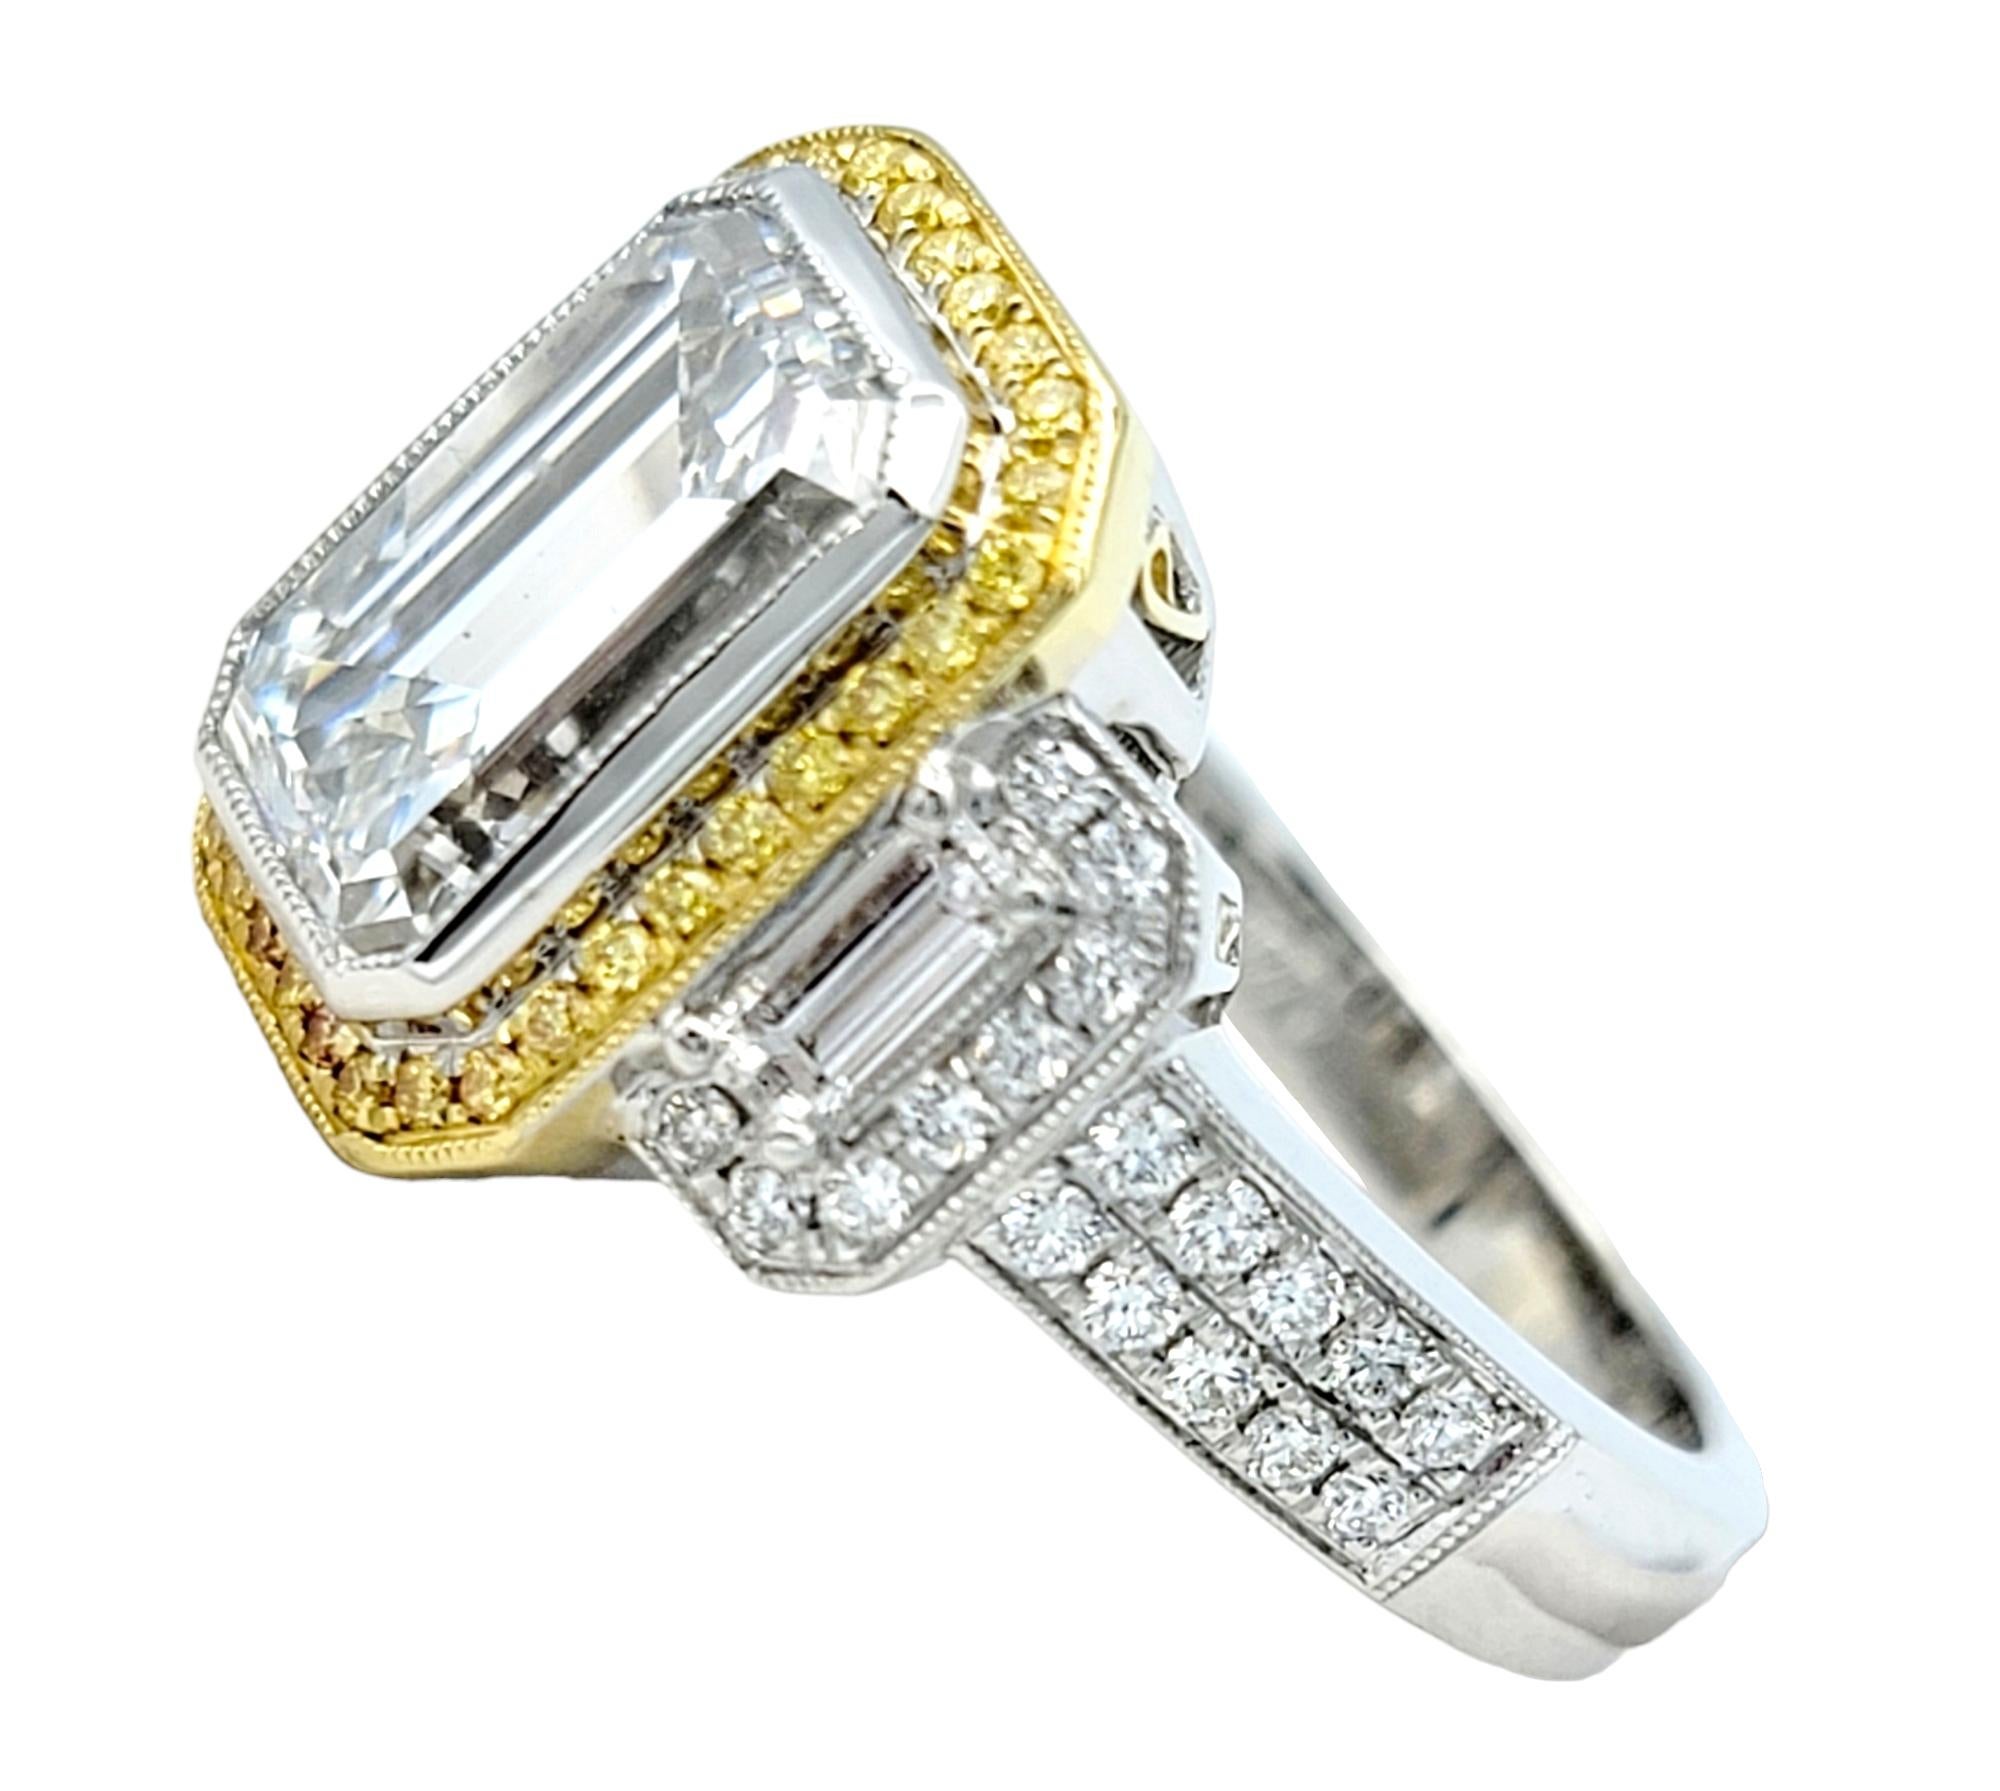 Simon G. 3.5 Carat Emerald Cut Diamond Three Stone Engagement Ring Two Tone Gold In Good Condition For Sale In Scottsdale, AZ